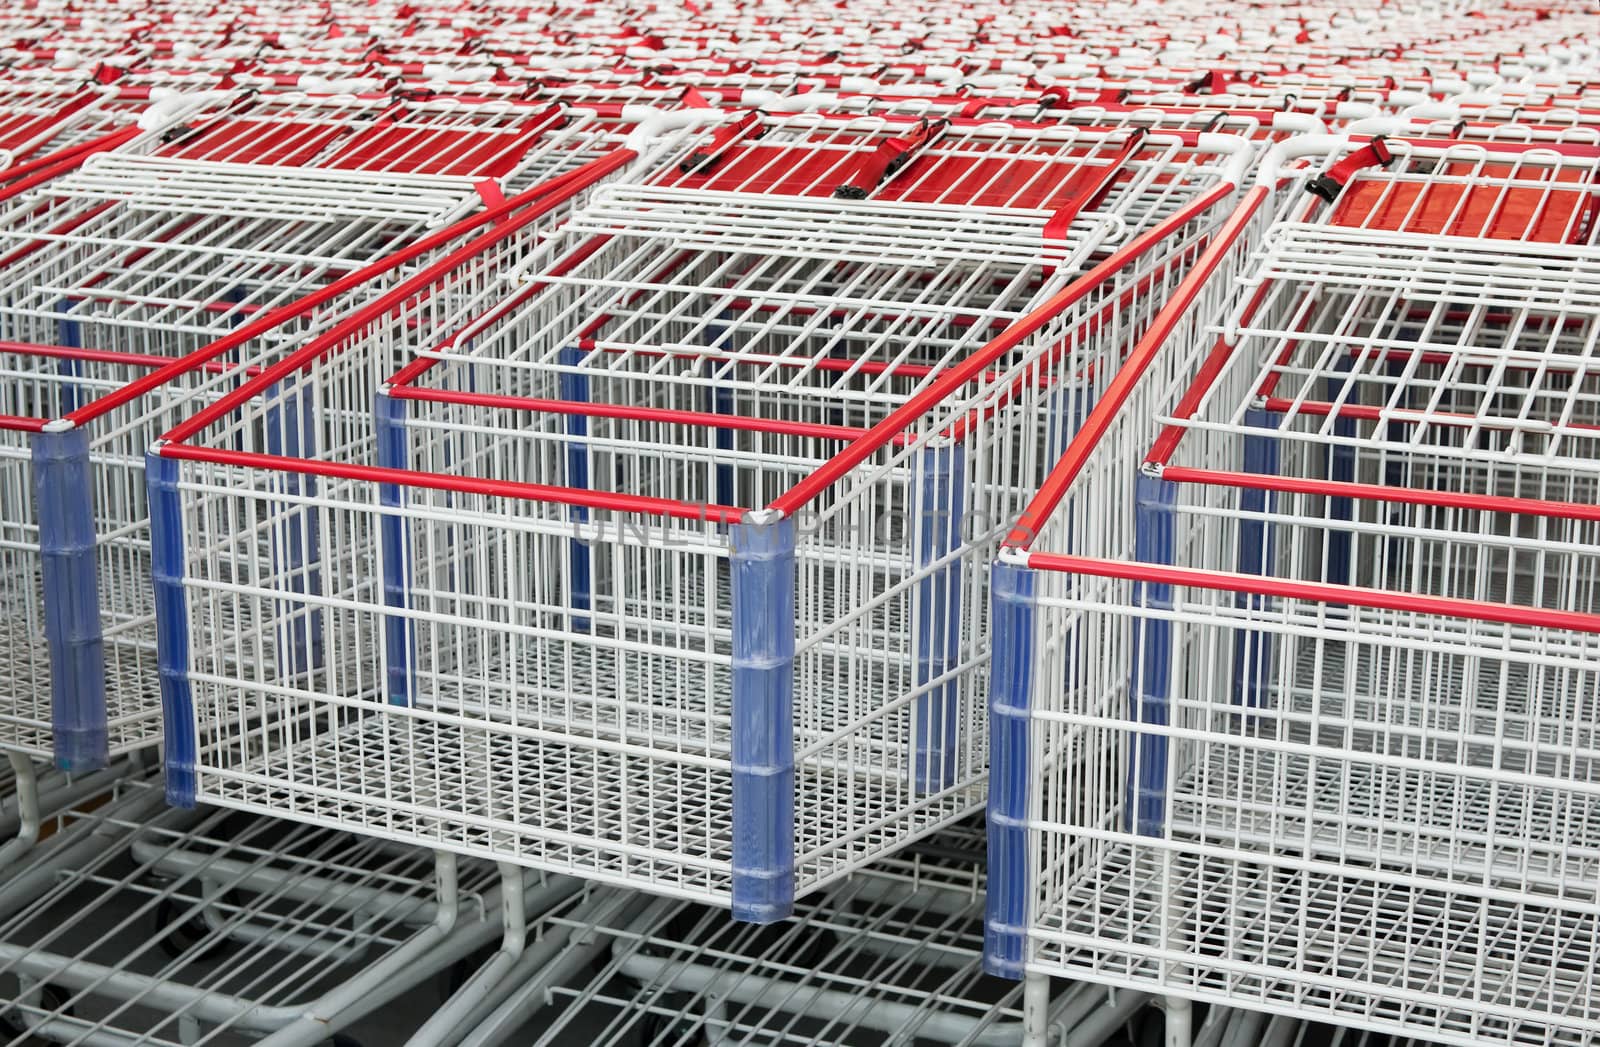 American shopping carts stacked together. by Shane9